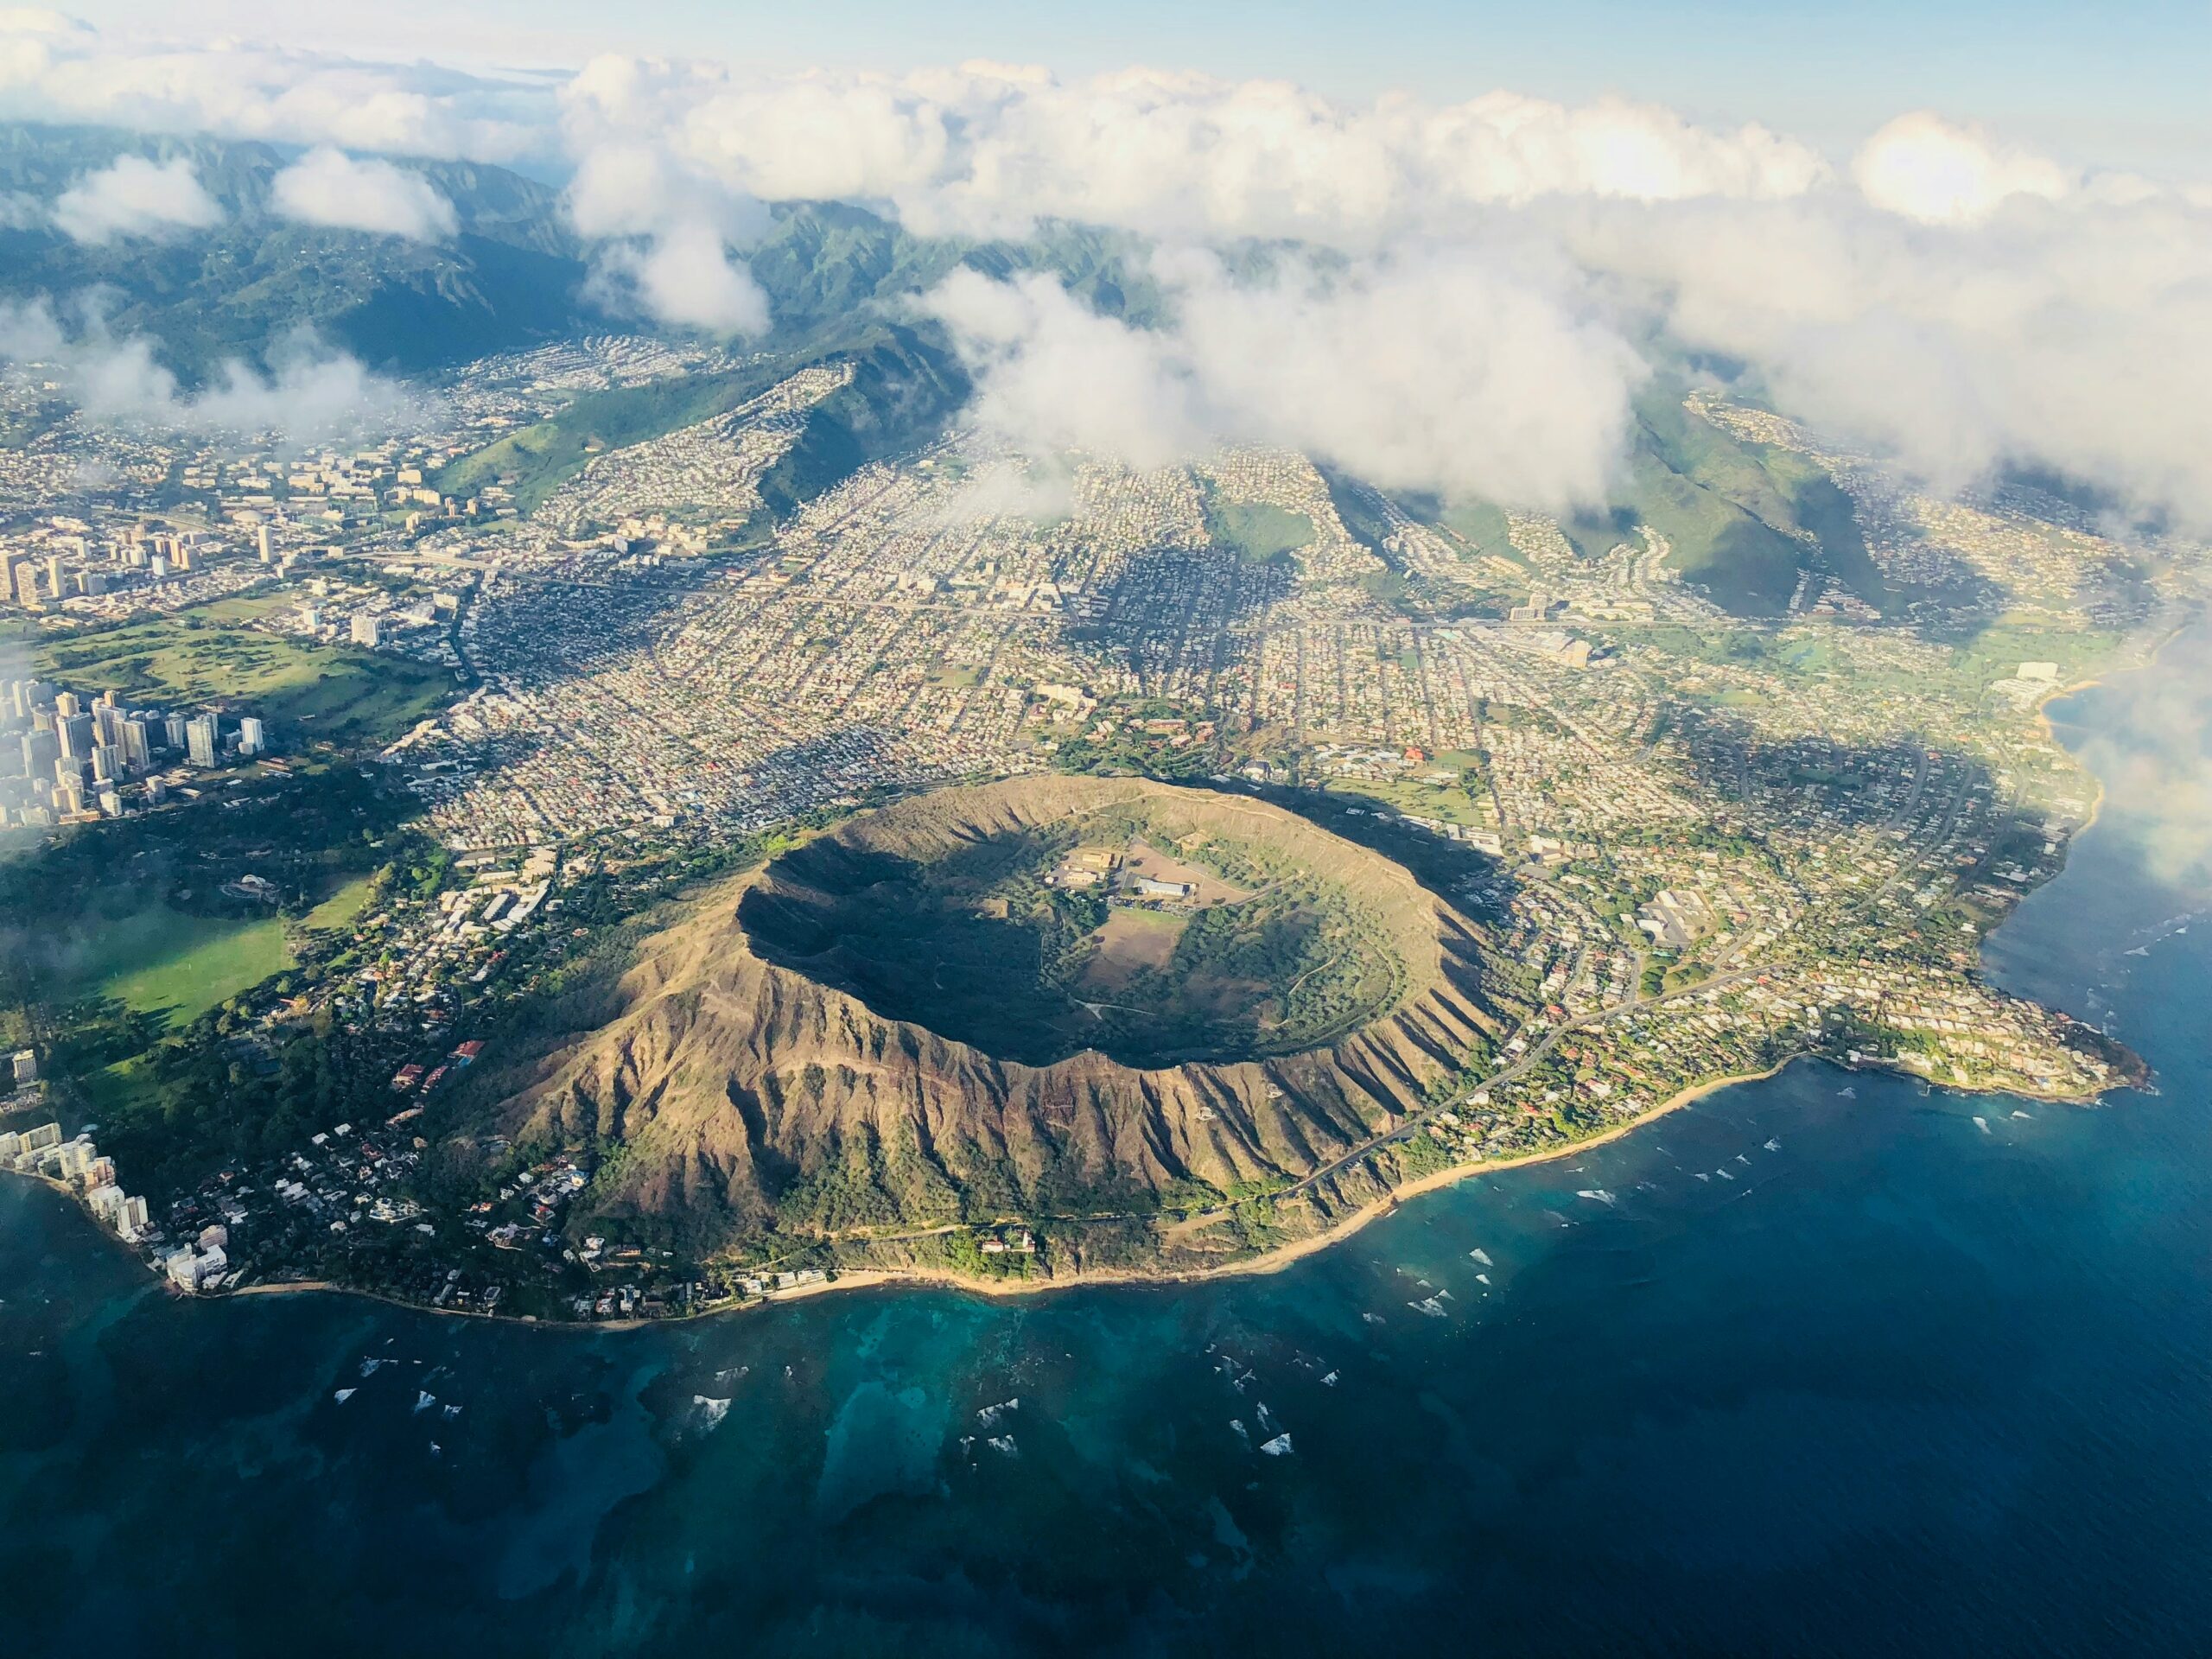 Oahu is one of the most popular tourist islands in Hawaii. 
Pictured: an aerial shot of the island of Oahu and the surrounding metropolitan area 